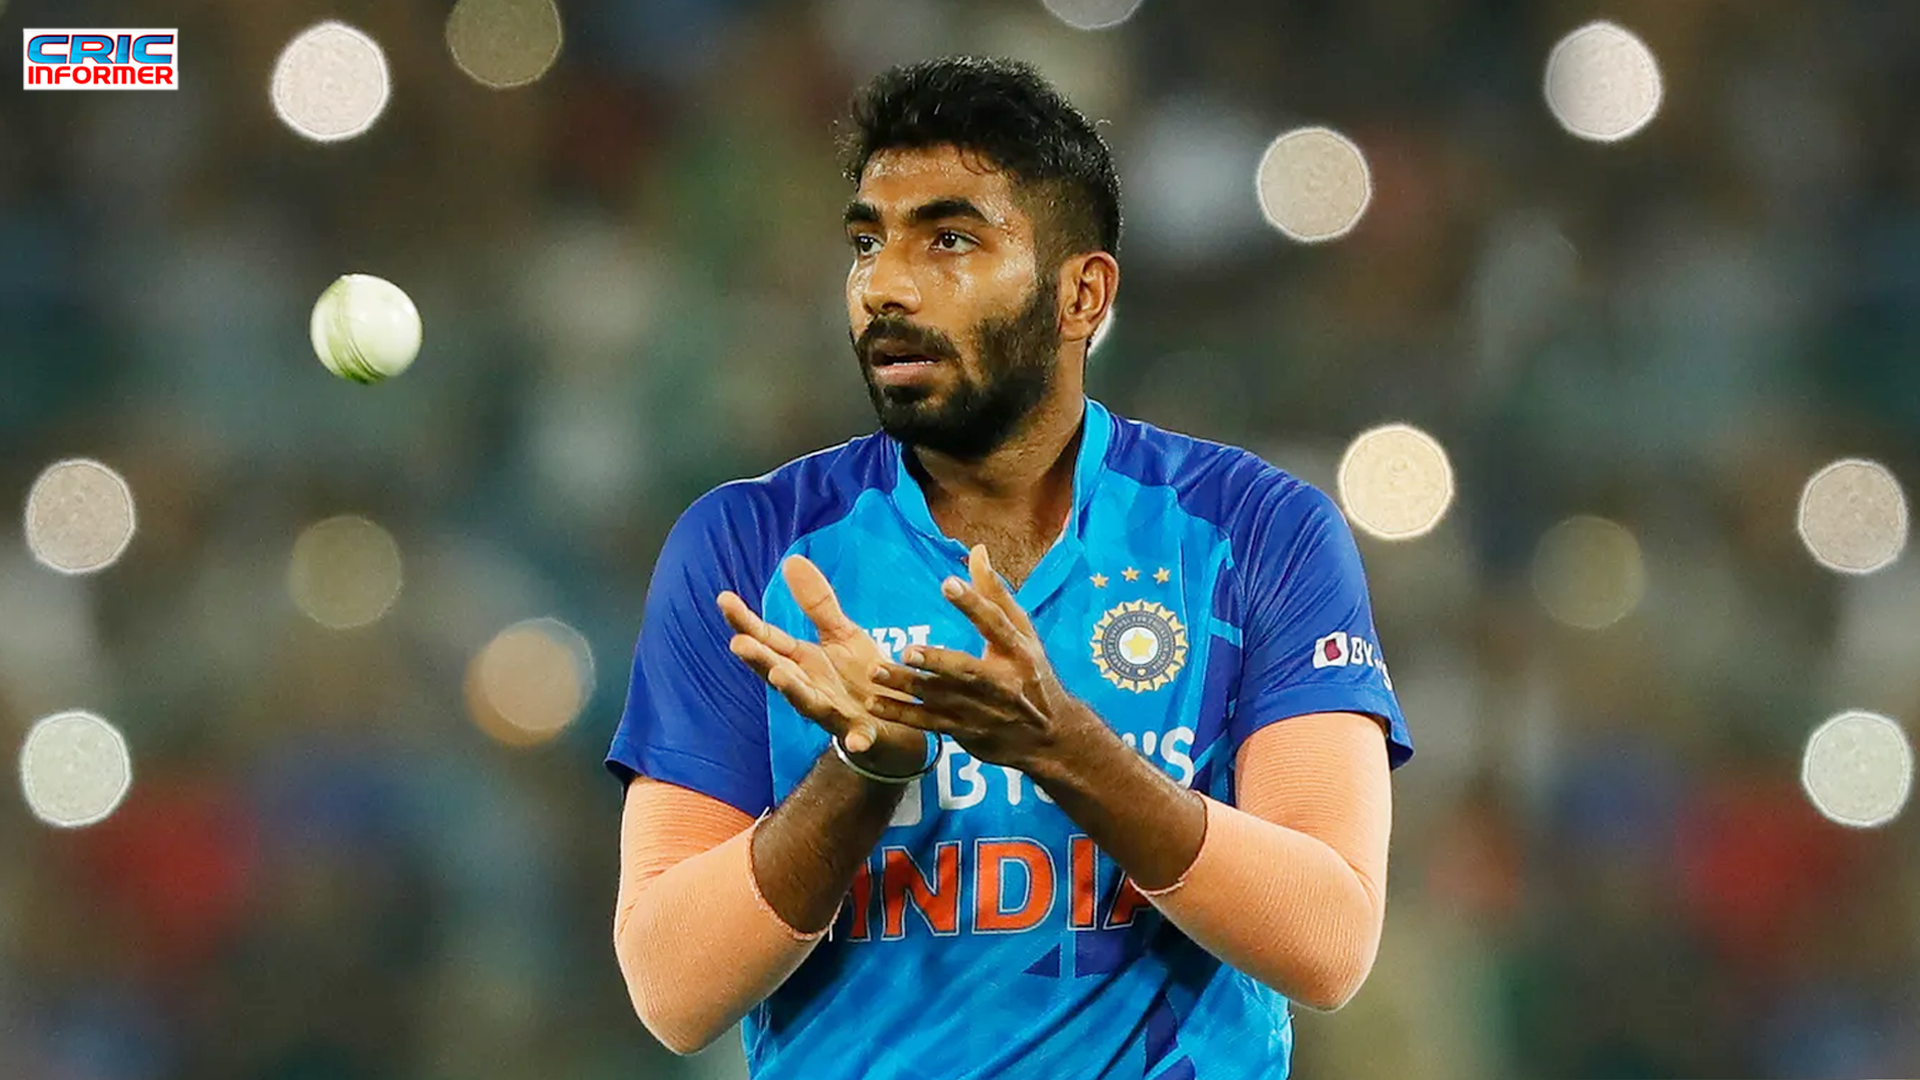 Breaking News: Jasprit Bumrah Ruled Out Of T20 World Cup, Confirms BCCI; Replacement To Be Announced Soon